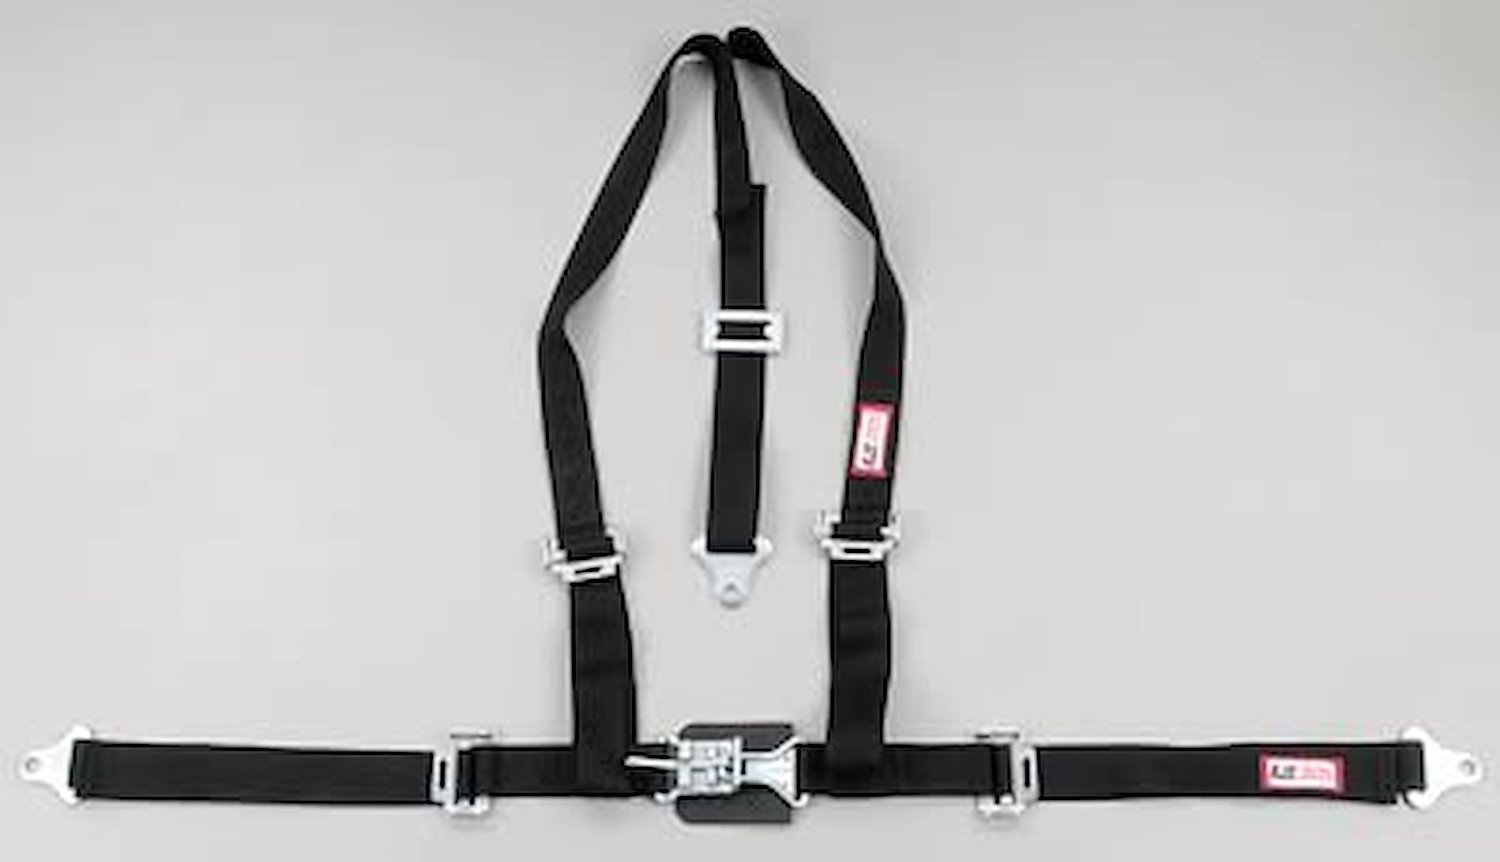 NON-SFI L&L HARNESS 3 PULL DOWN Lap Belt SNAP SEWN IN 2 S.H. Individual ROLL BAR Mount WRAP/SNAP GRAY